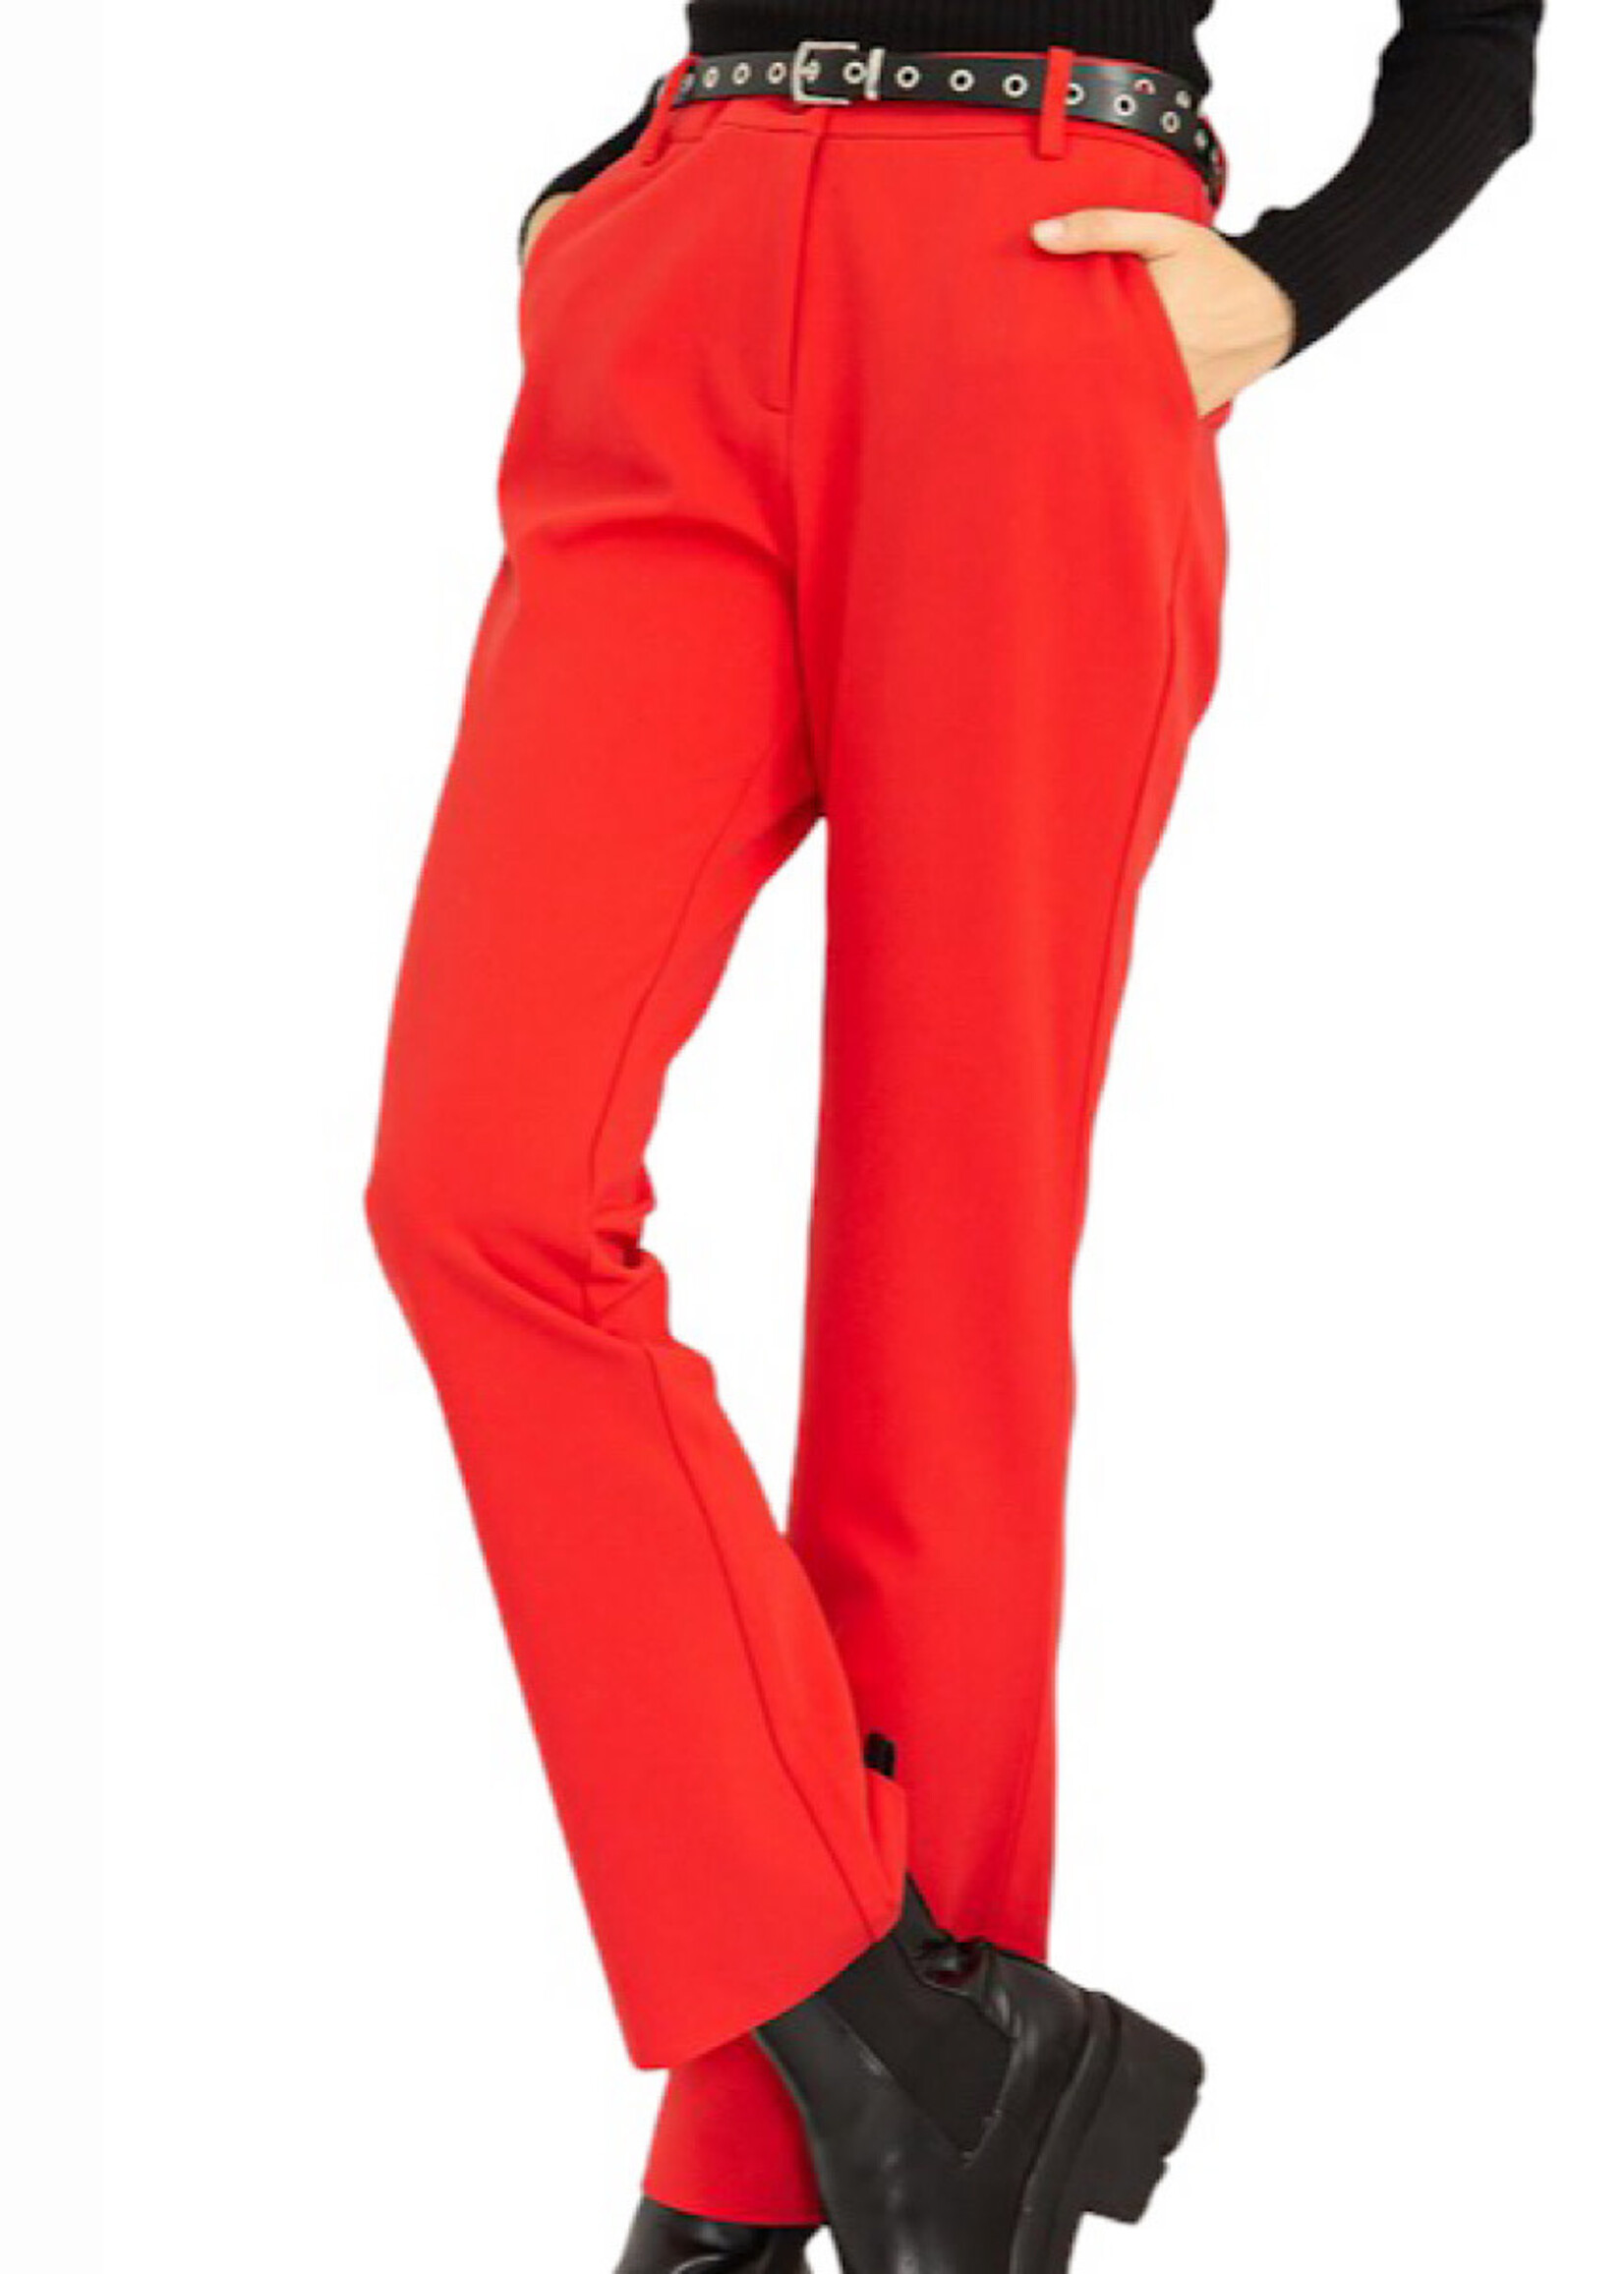 Red High Waisted Cropped Flare Pants